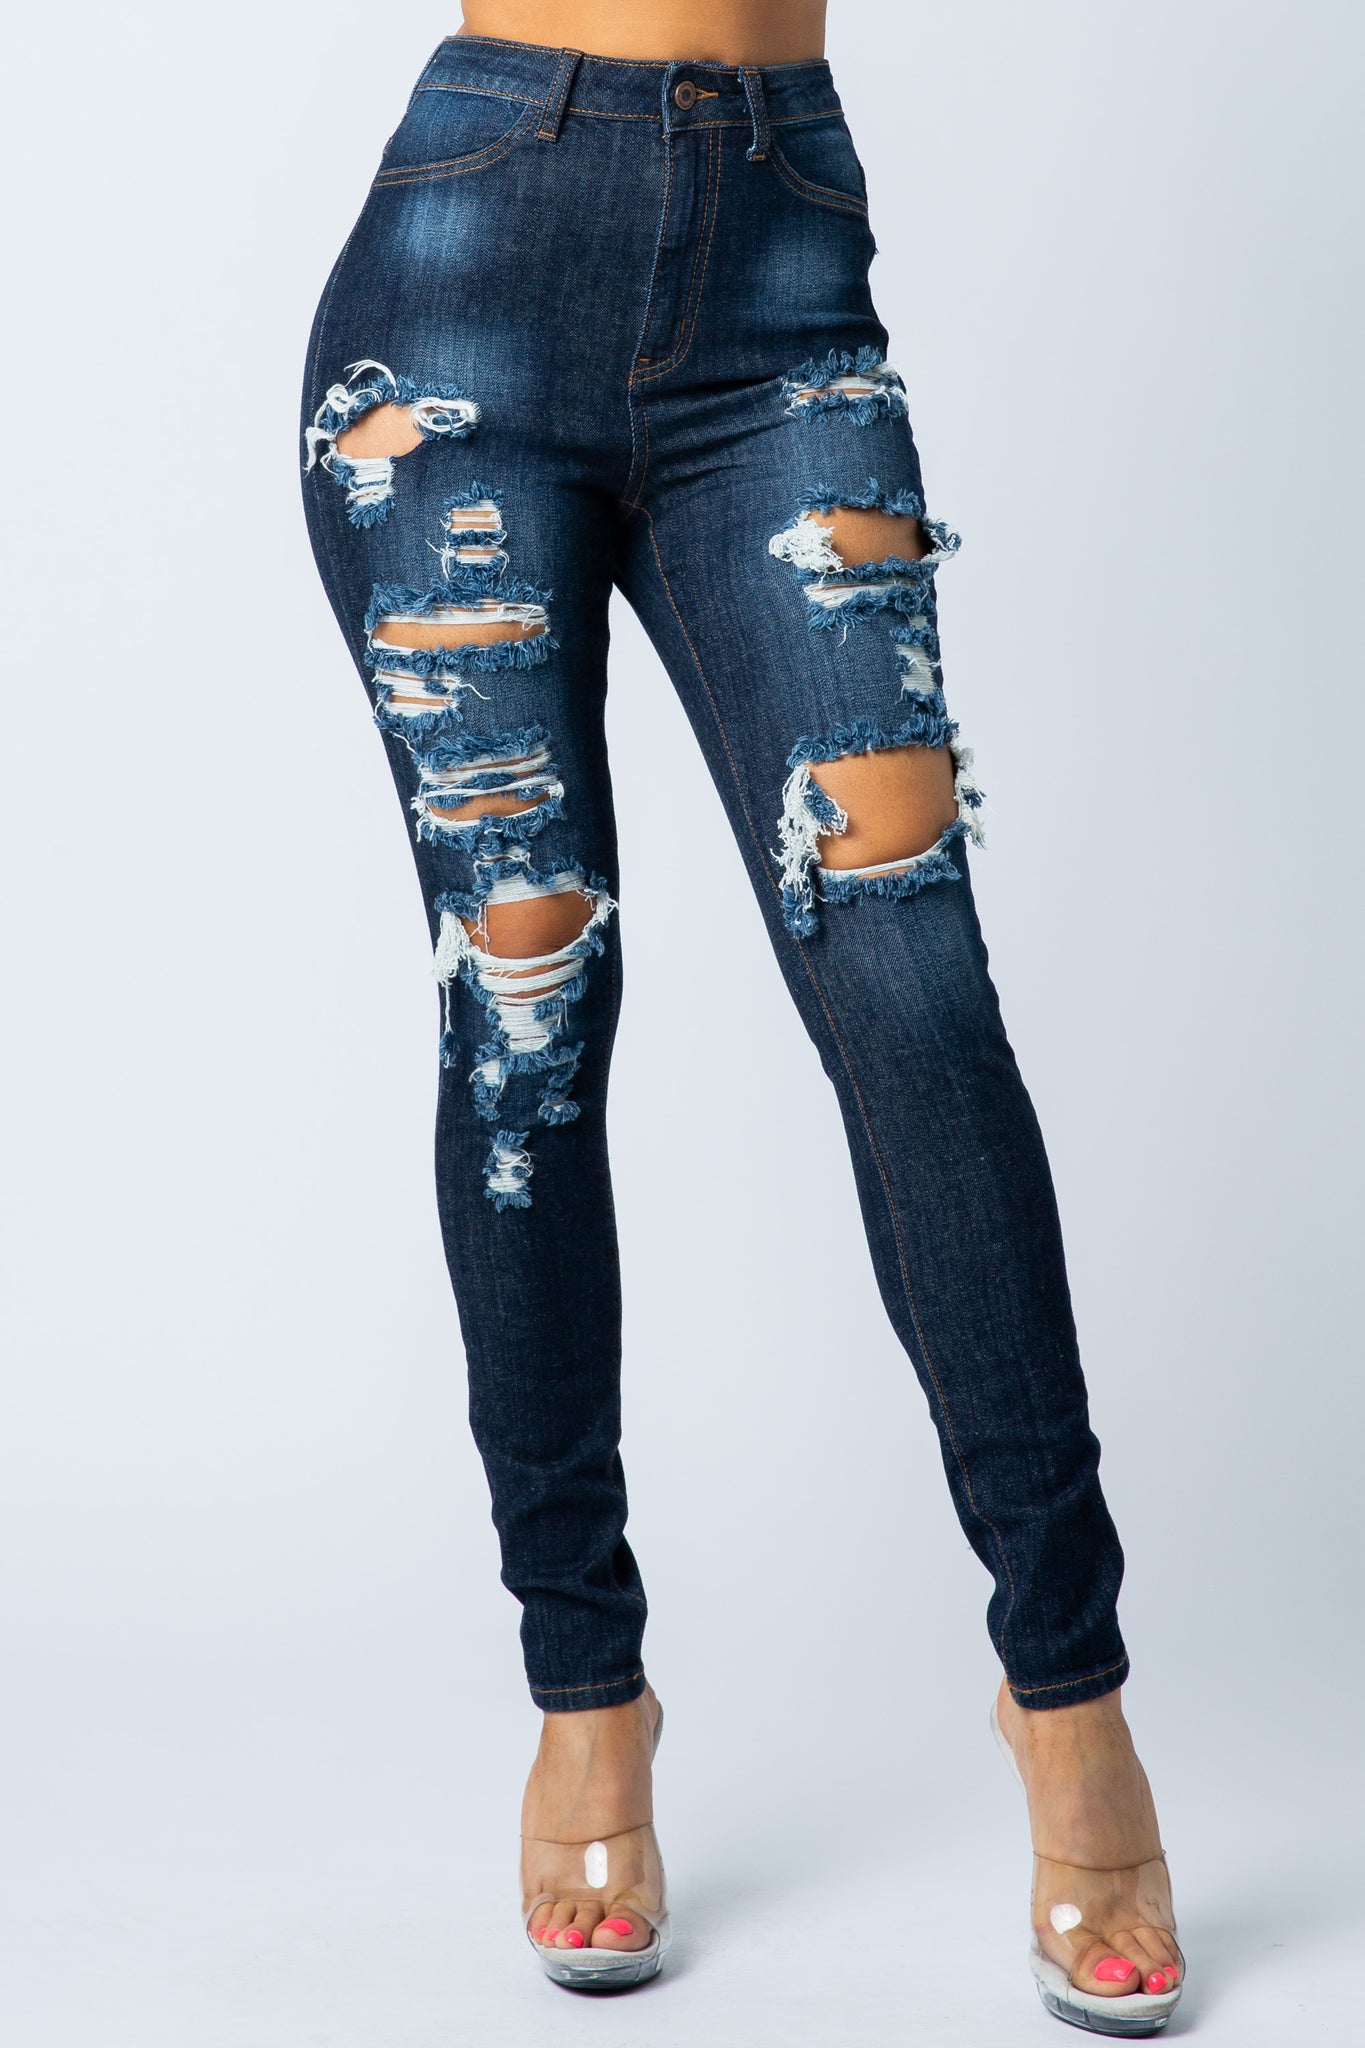  Womens Ripped Jeans For Women High Waisted Jeans